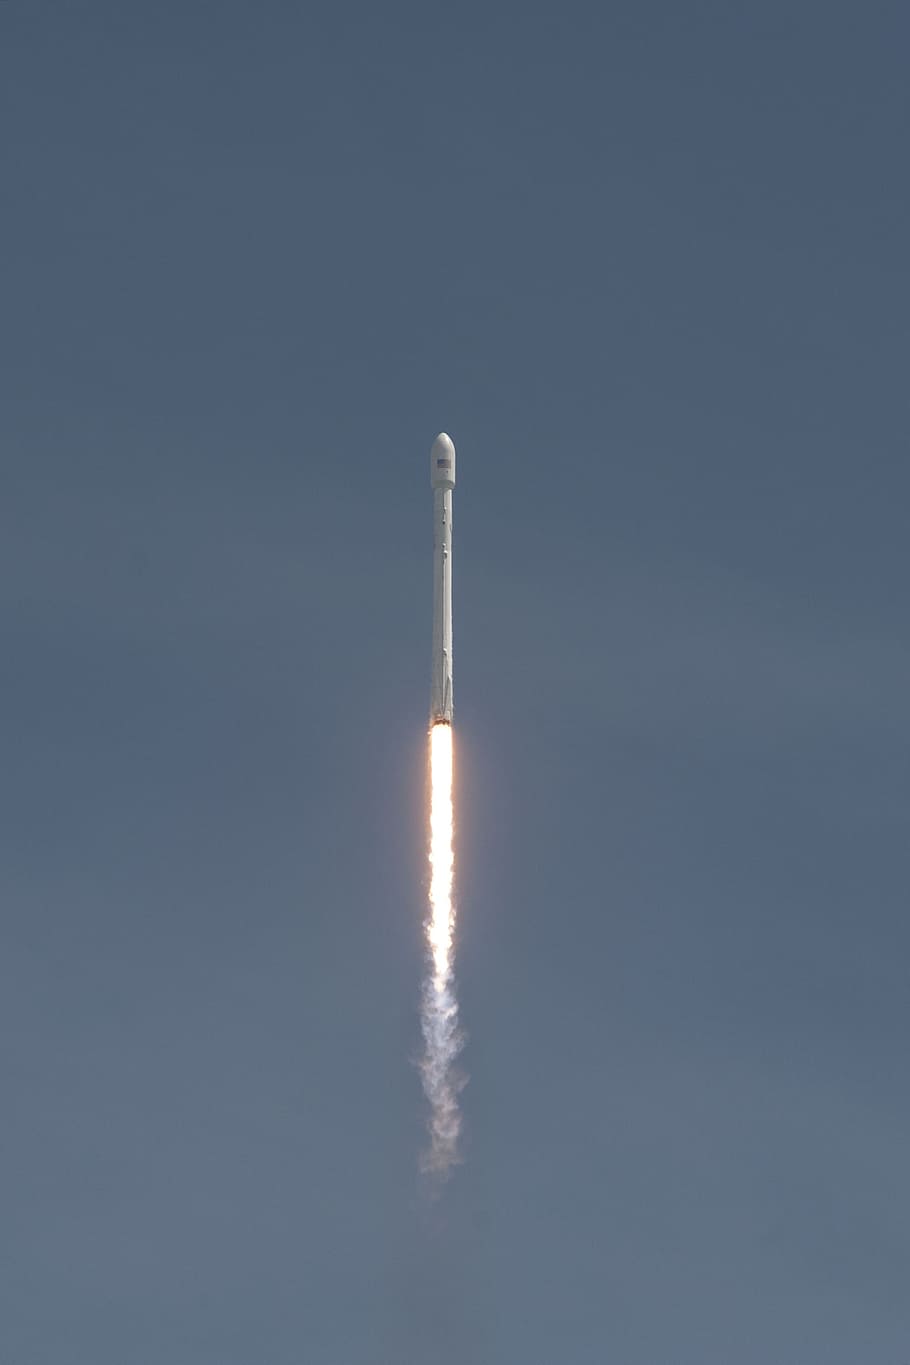 missile launching, rocket launch, spacex, lift-off, flames, propulsion